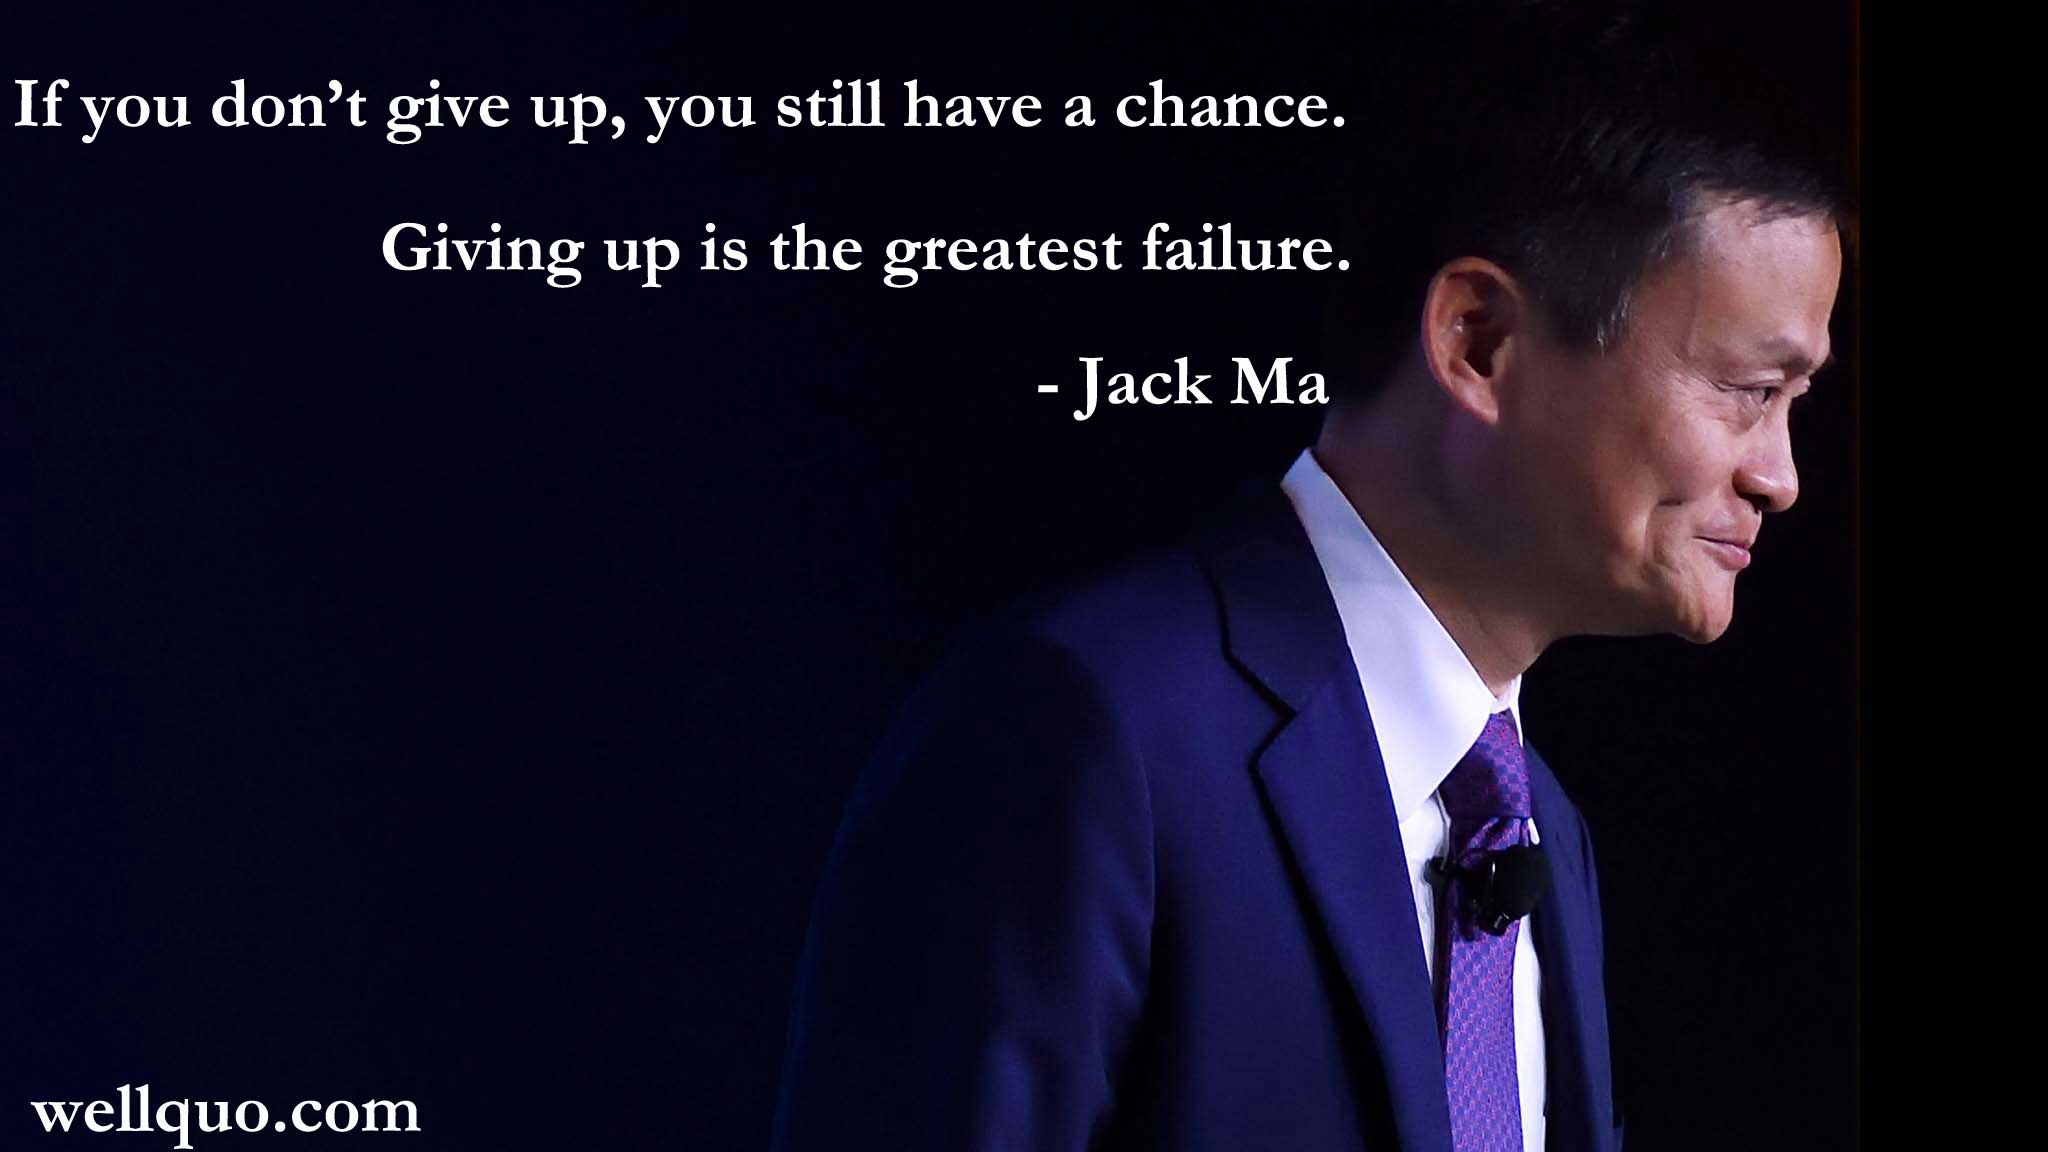 Giving up is the greatest failure.